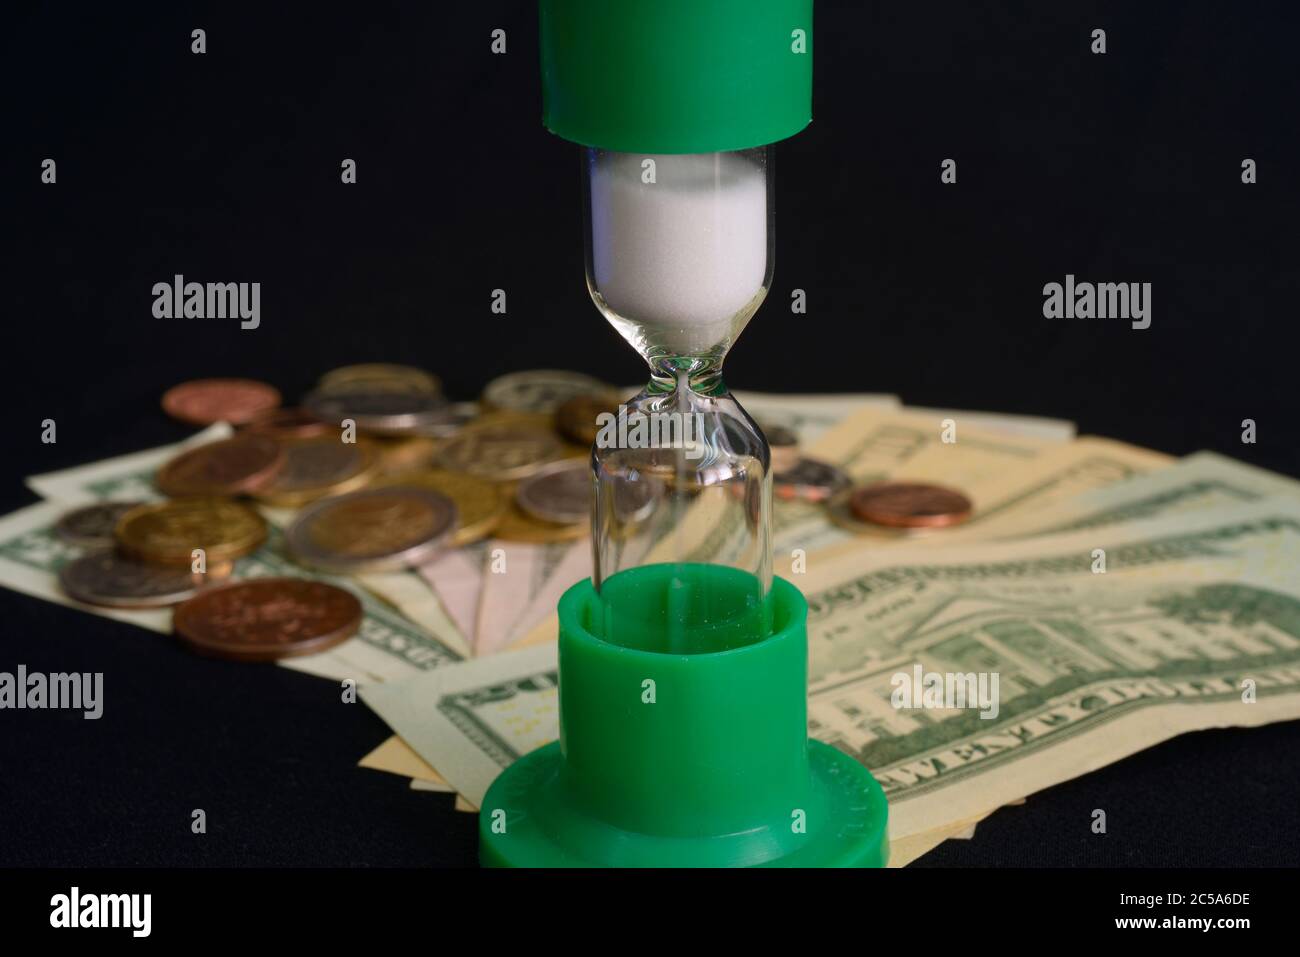 Time is money, do not waste your time: sand flowing in an hourglass, put on the blurred coins and USA banknotes background Stock Photo